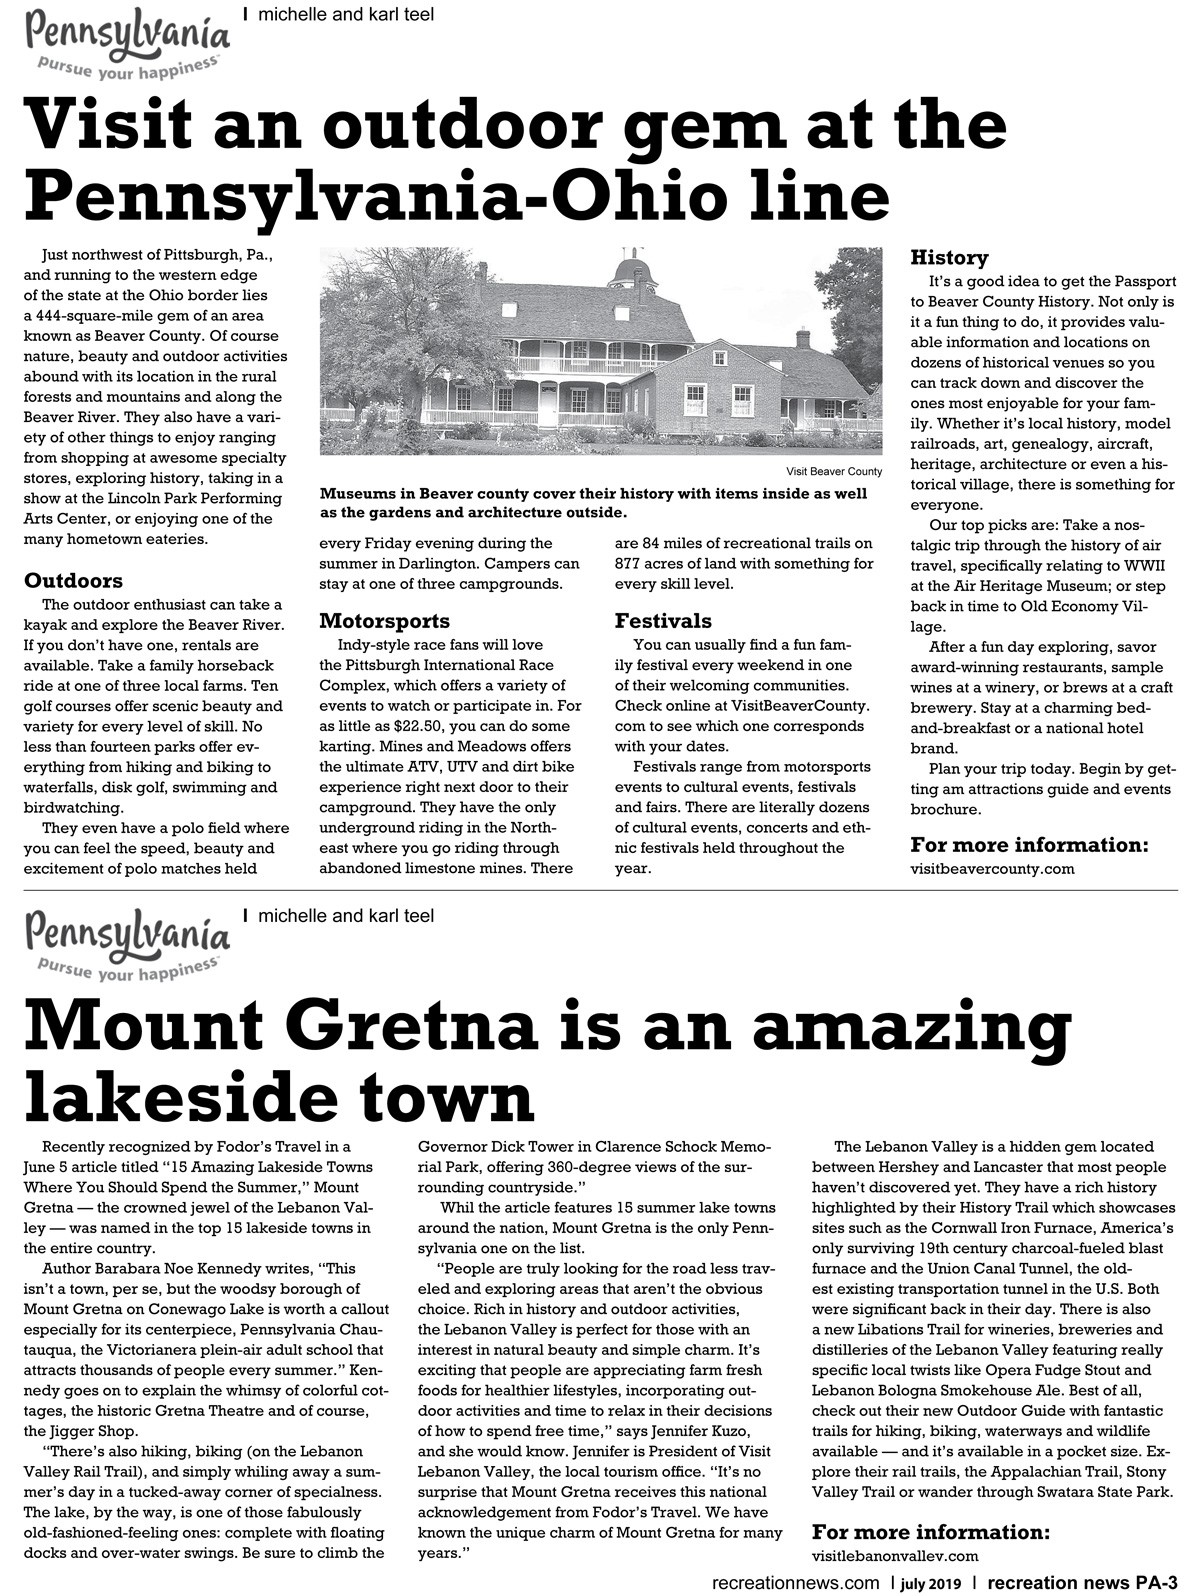 Article featuring Mount Gretna as an "Amazing Lakeside Town"